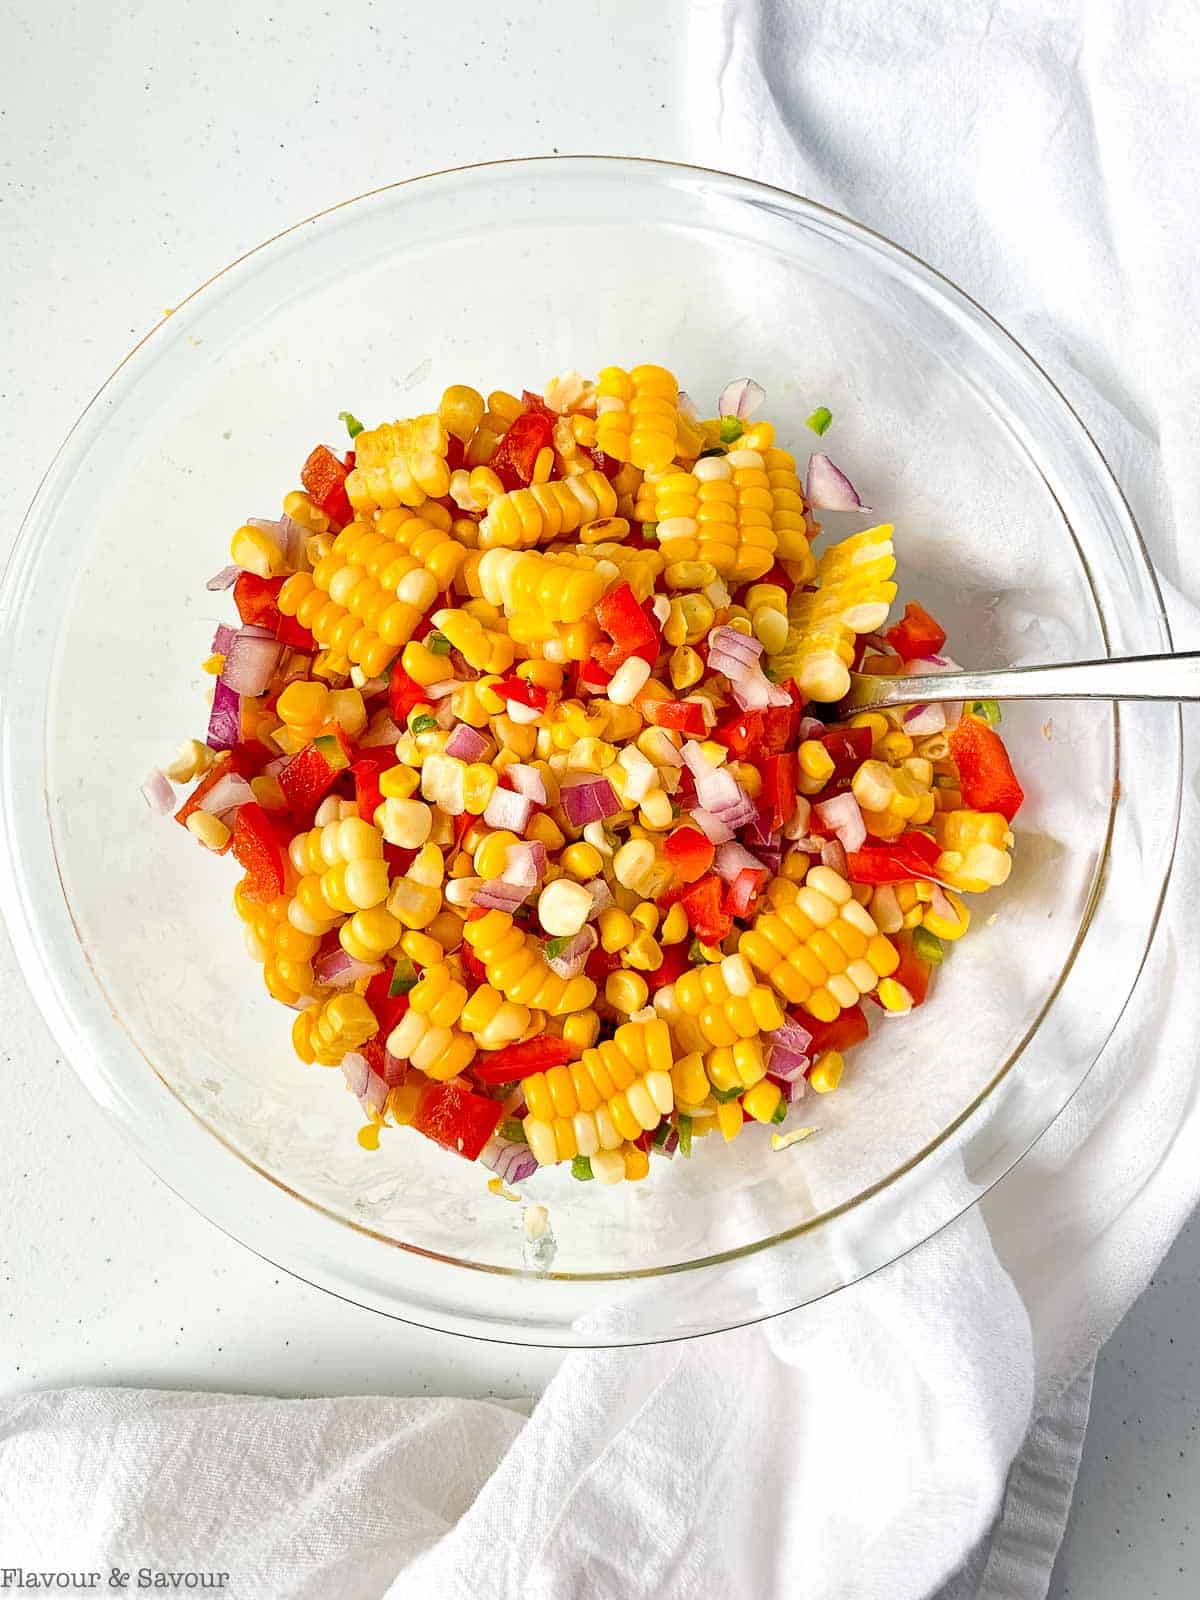 Ingredients for Mexican corn salad in a bowl.